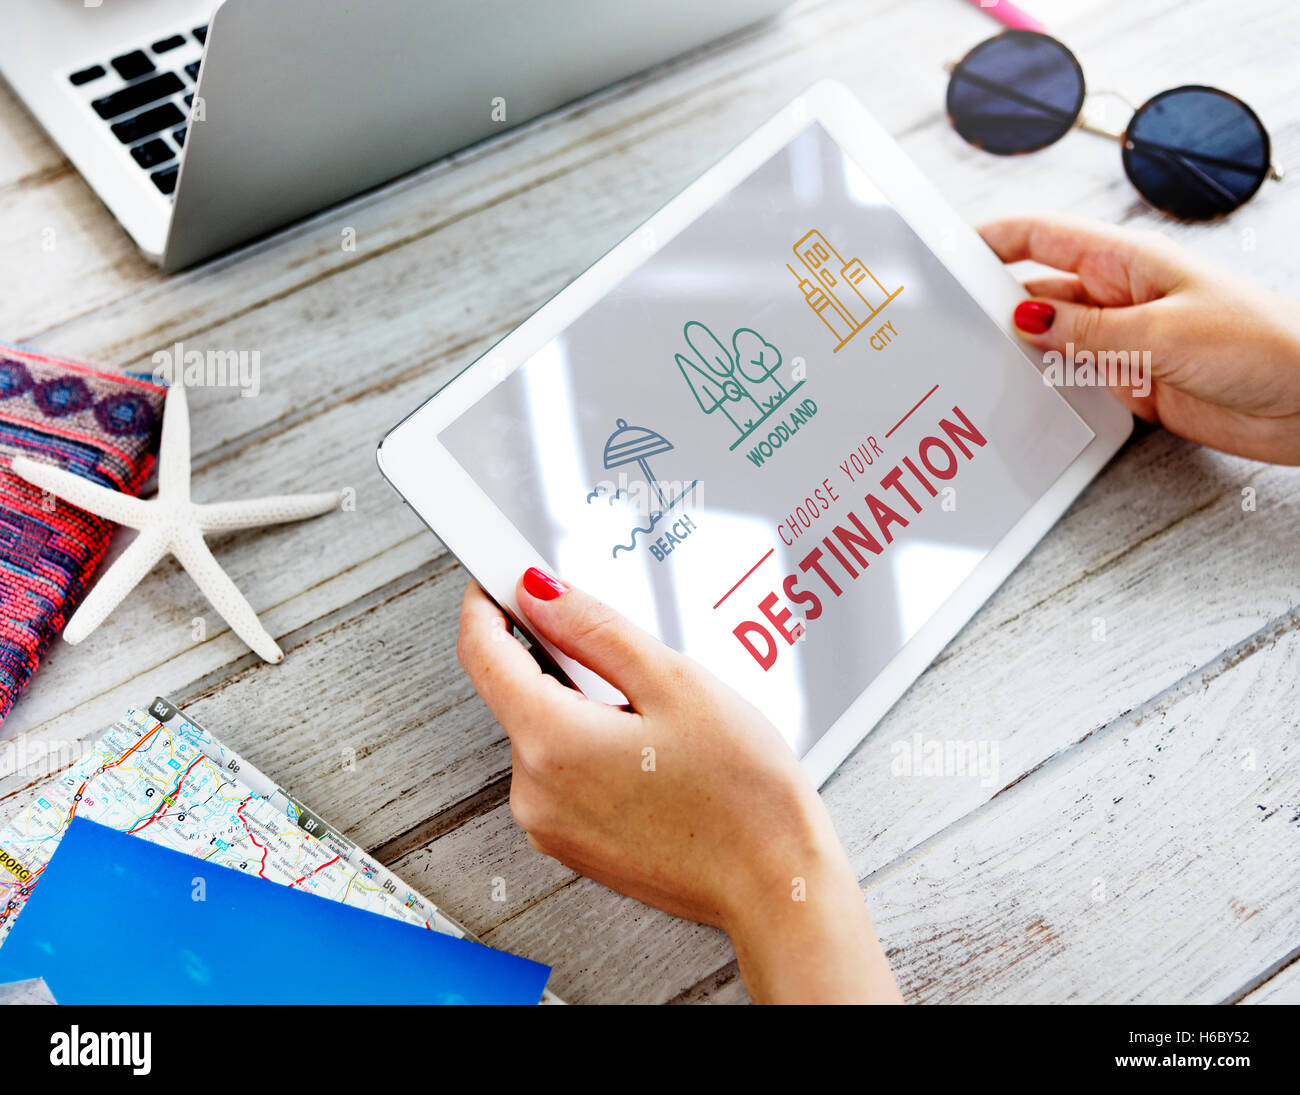 Booking Hotel Reservation Travel Destination Concept Stock Photo